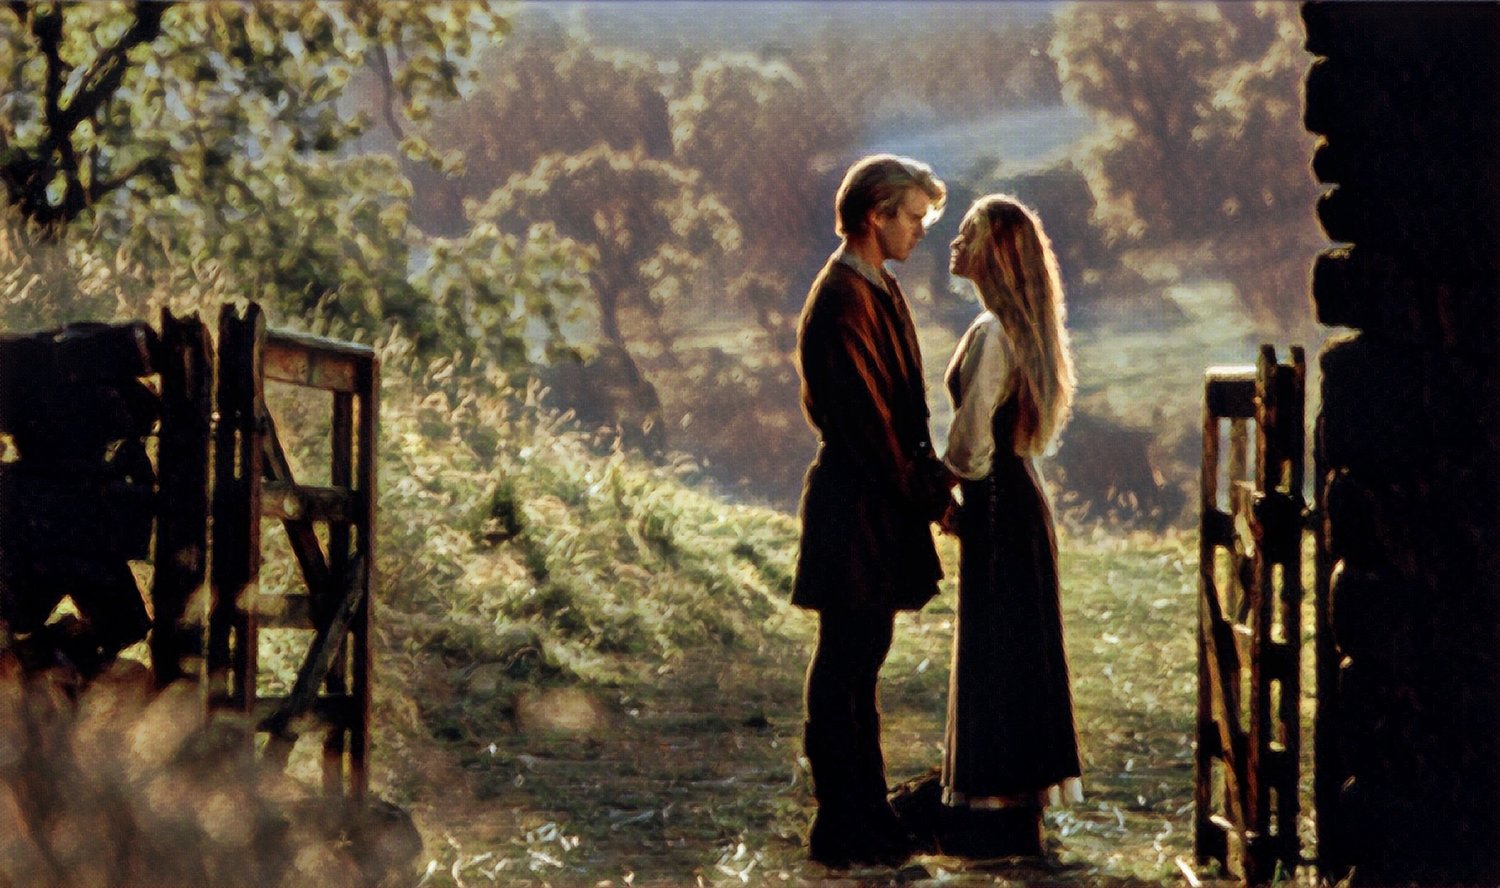 The Princess Bride, minutes 82 to 84